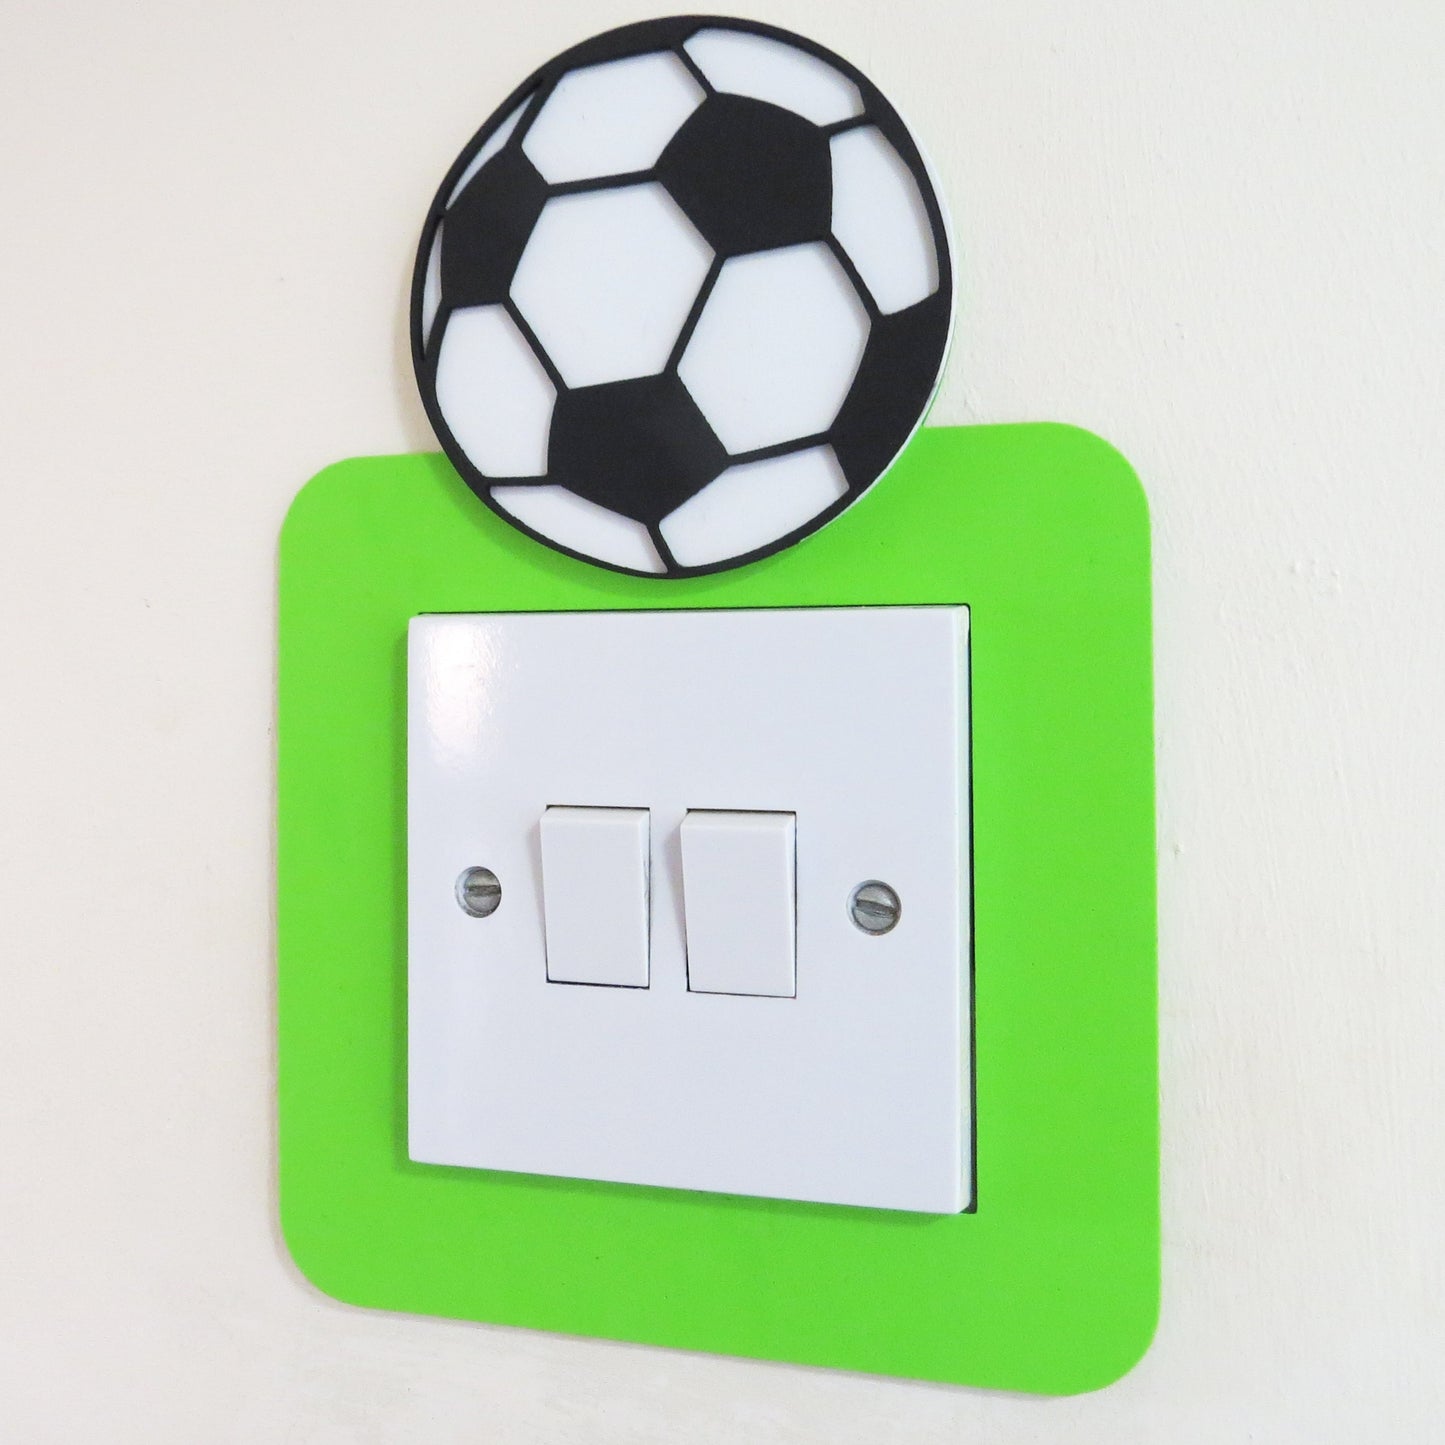 Green craft foam light switch surround designed with a black and white football